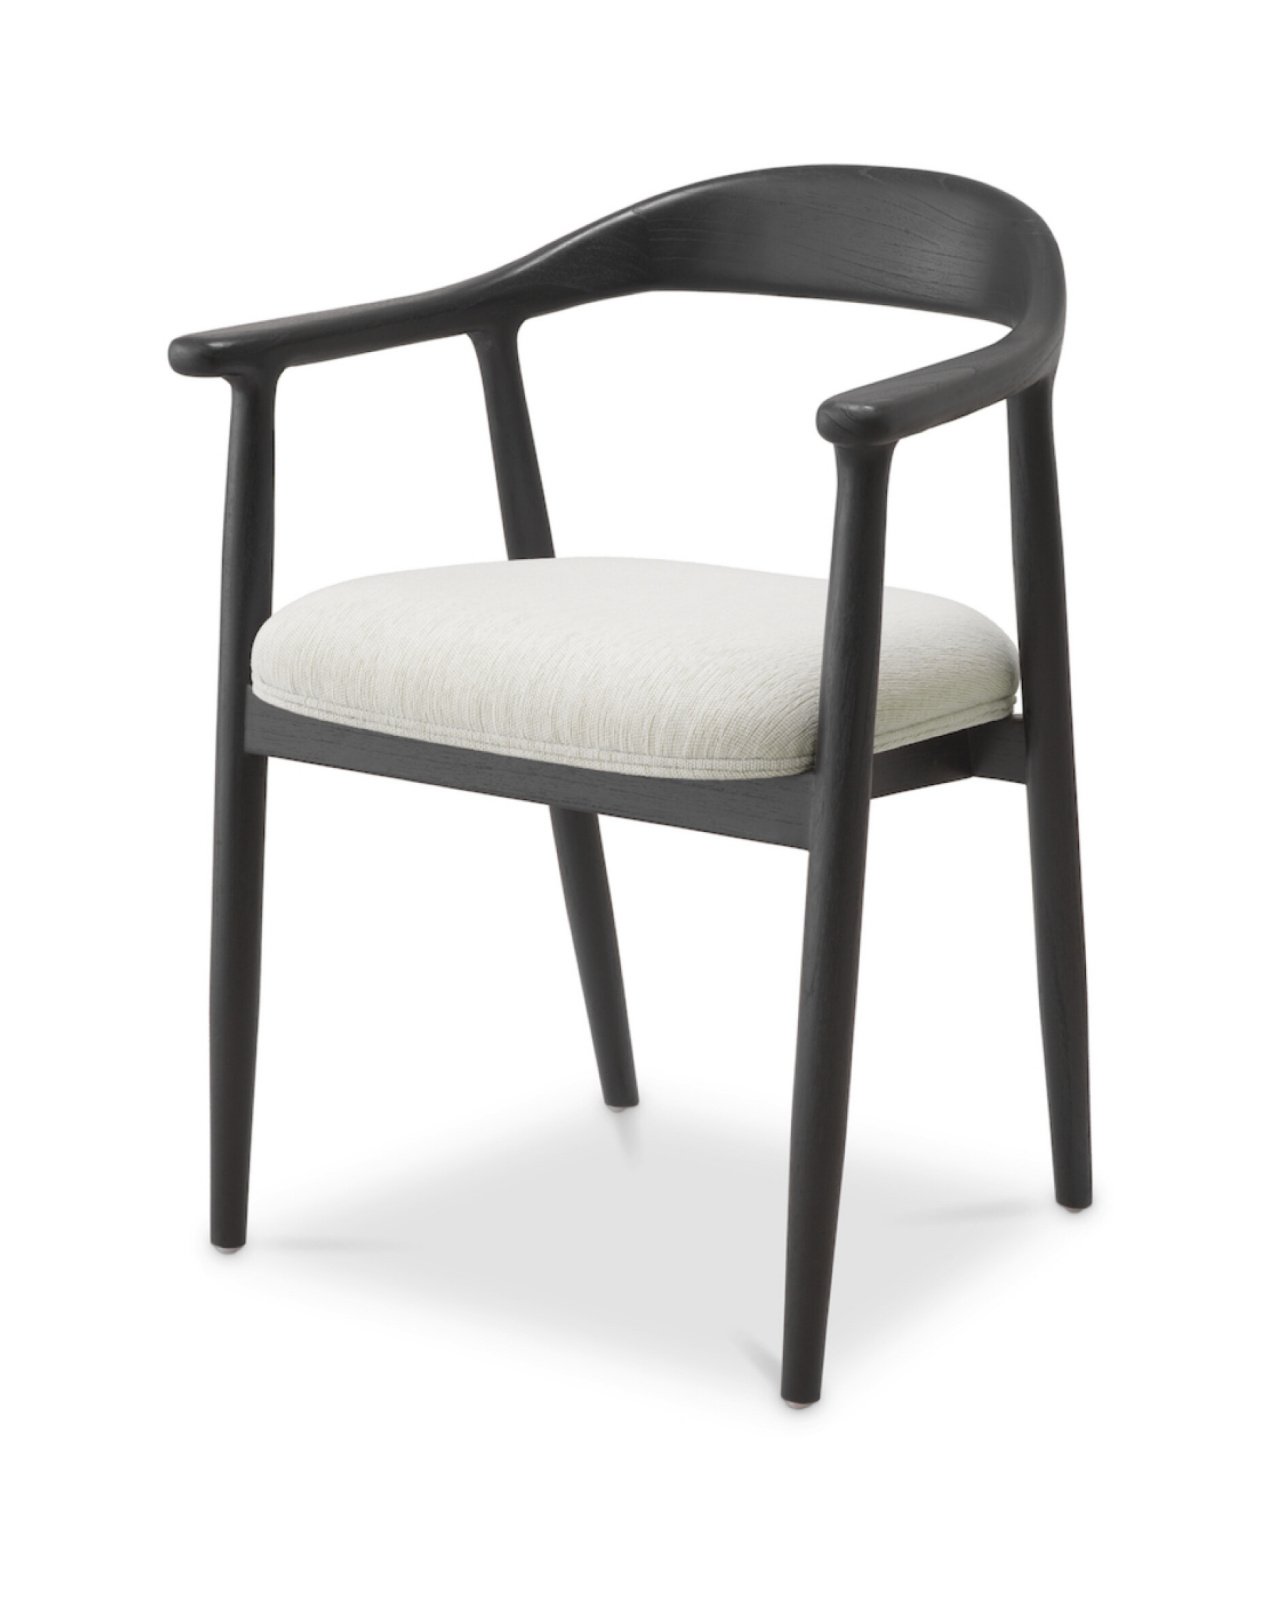 Beale Dining Chair Black / White